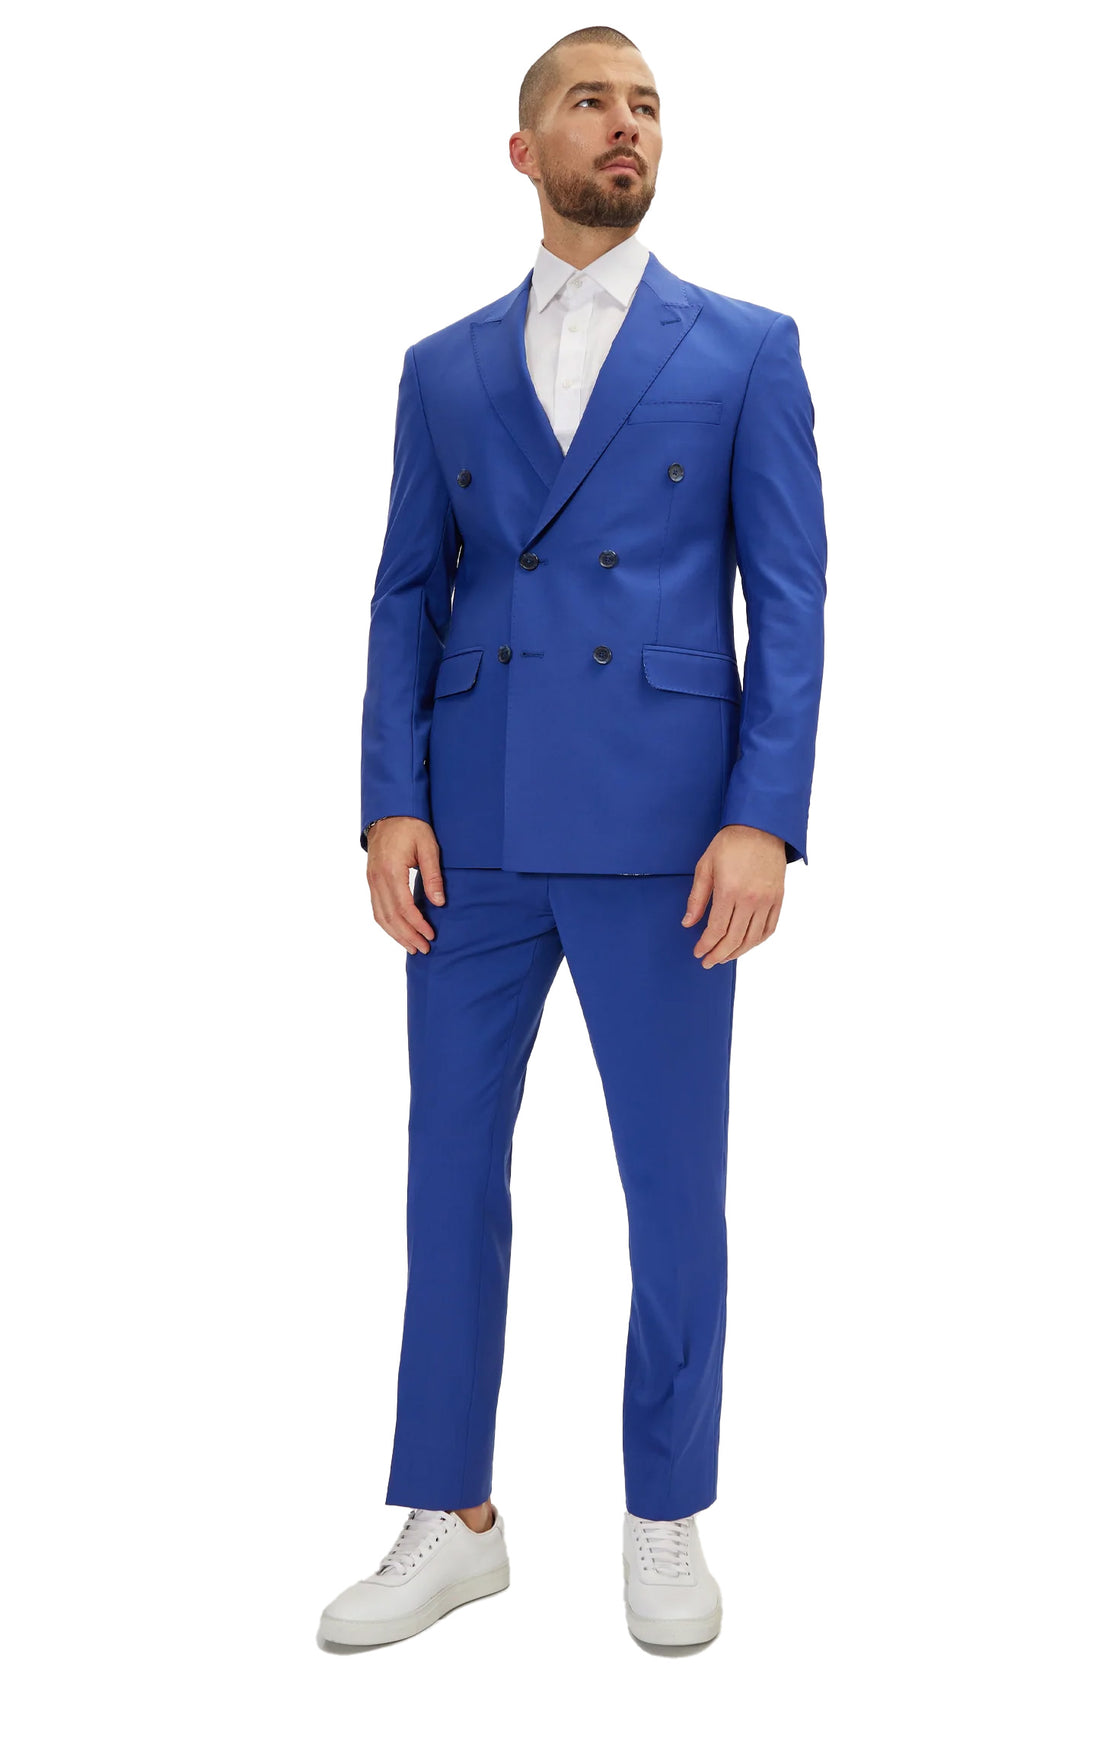 N° R206 SUPER 120S MERINO WOOL DOUBLE BREASTED SUIT - REFLEX BLUE